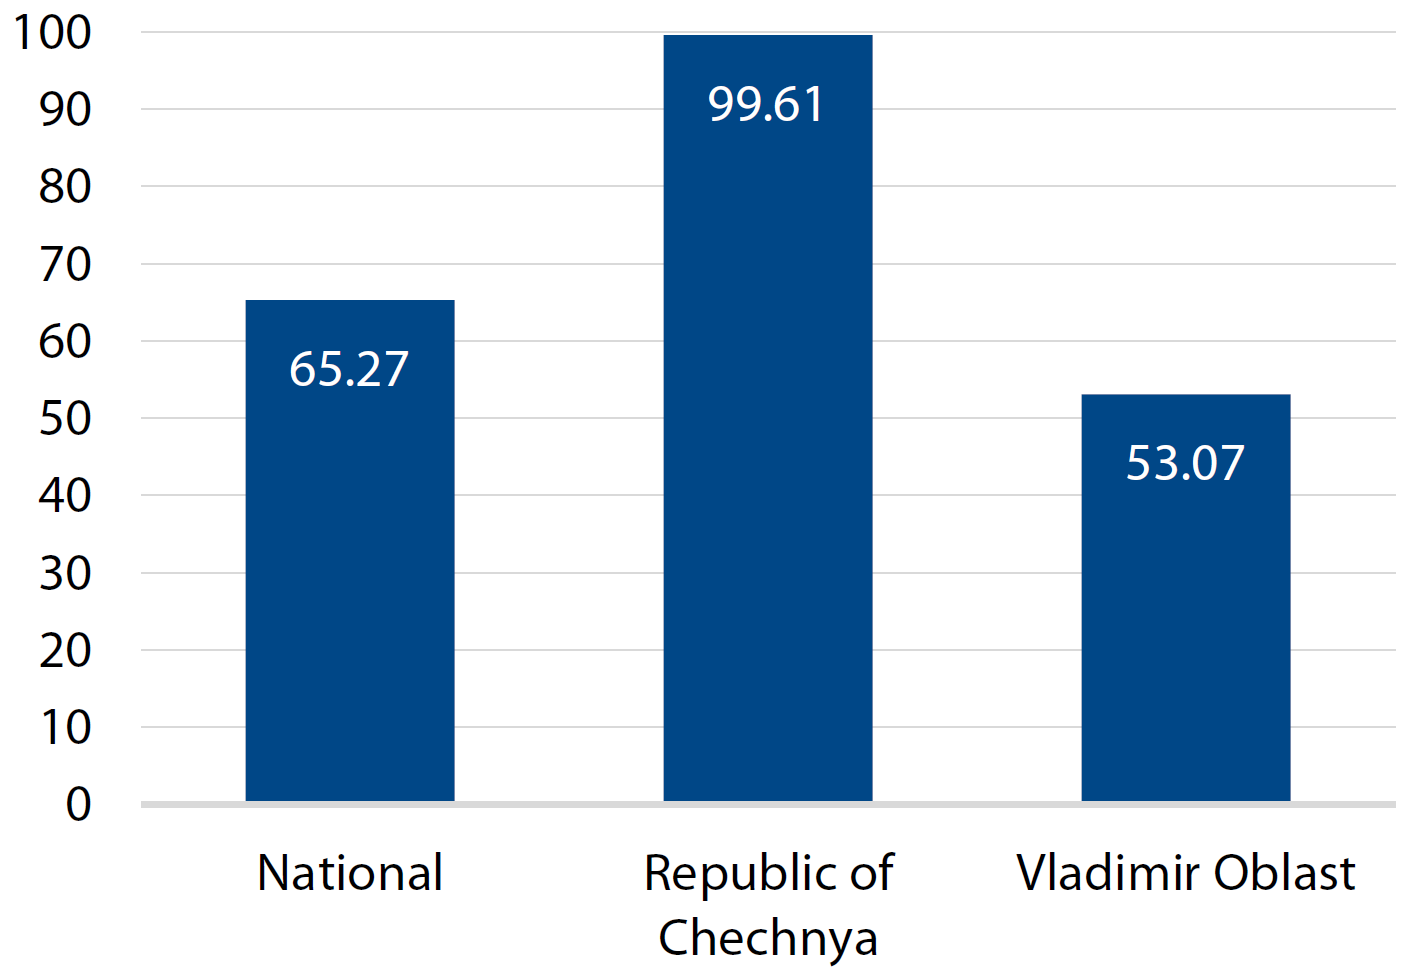 Figure 2: The highest and lowest reion-level turnout in the 2012 Russian presidential election